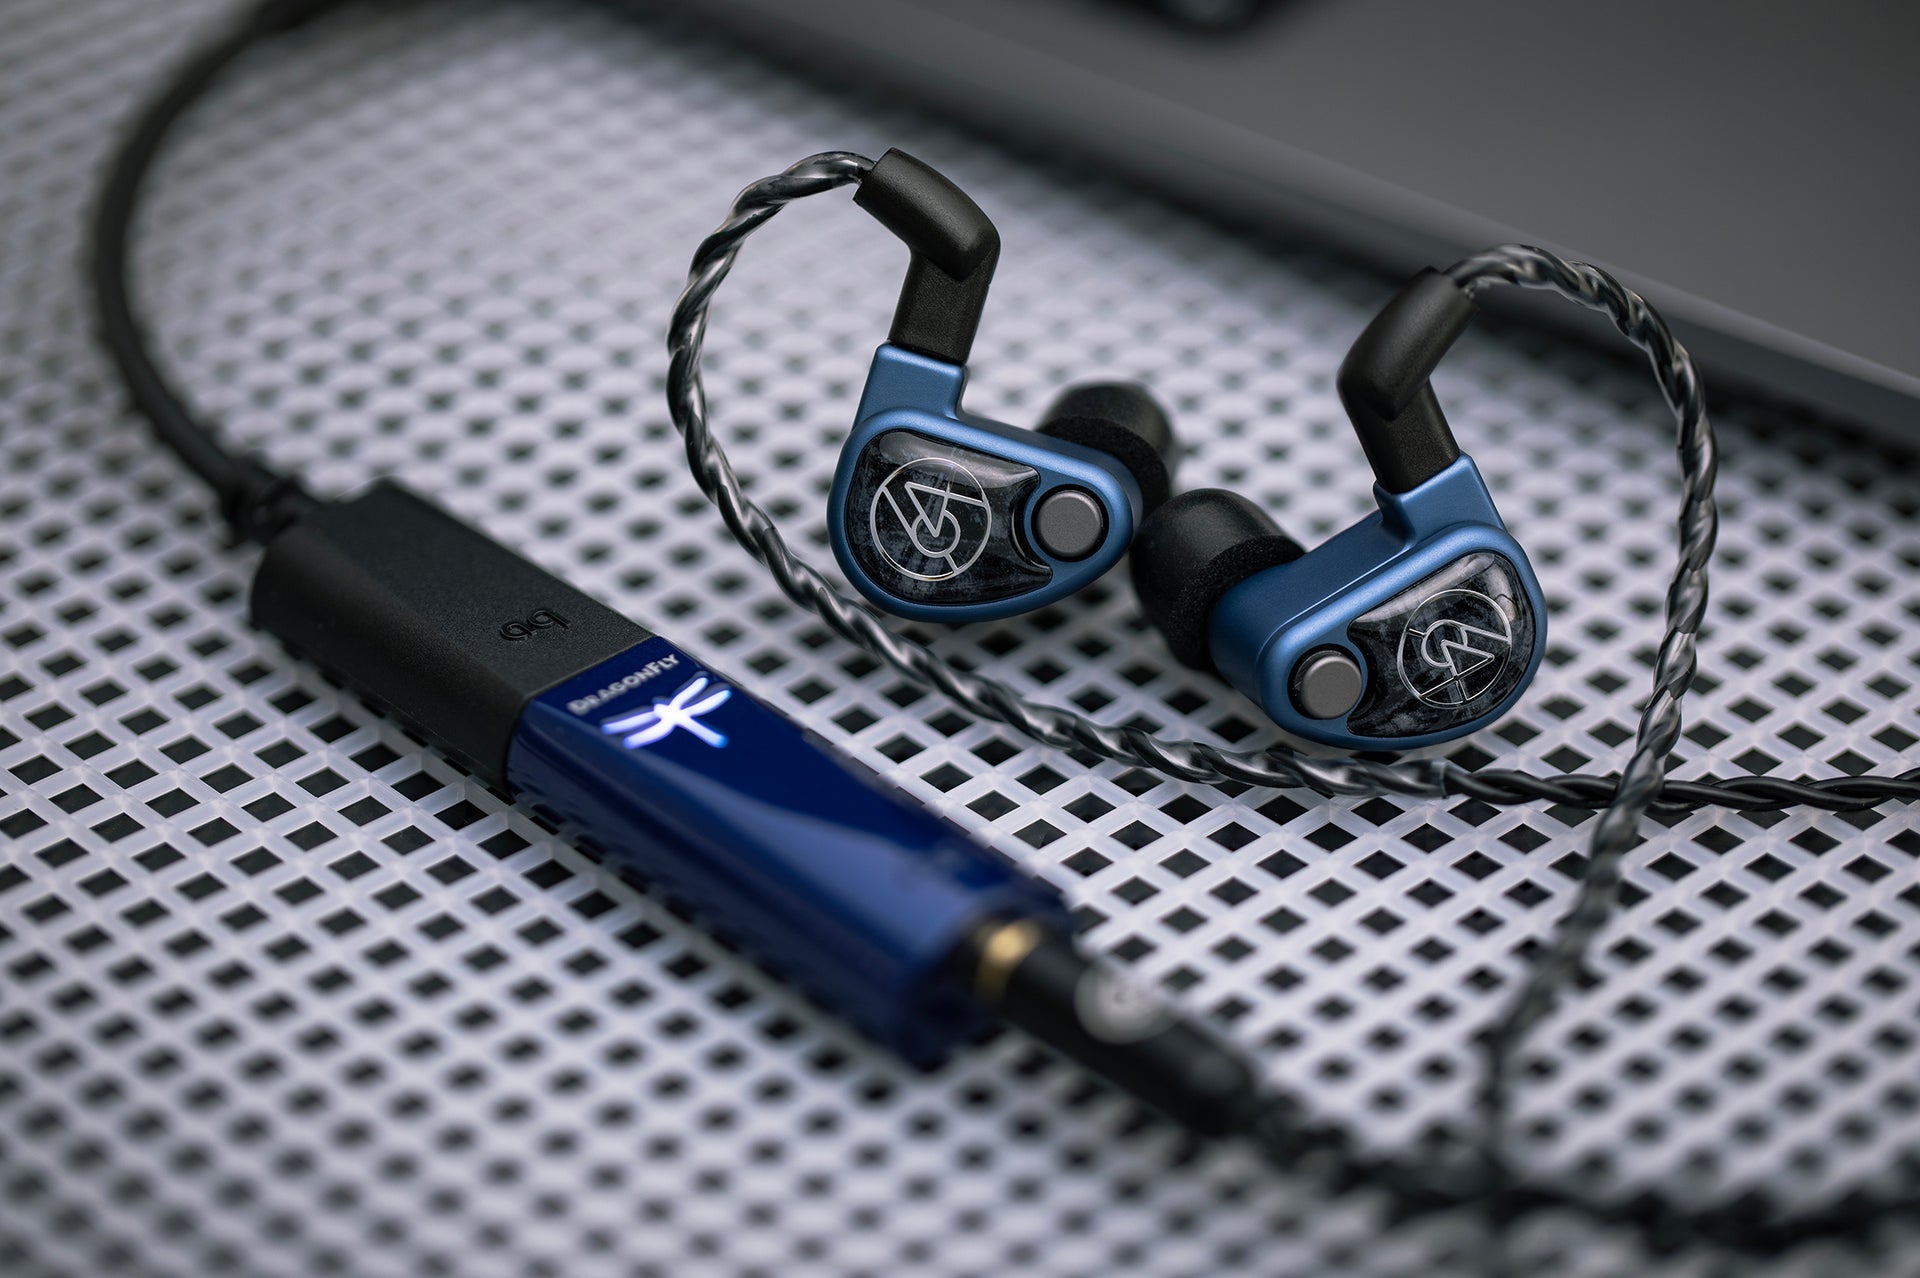 64 audio u4s in-ear monitor headphones with audioquest dragonfly cobalt portable usb dac and headphone amplifier